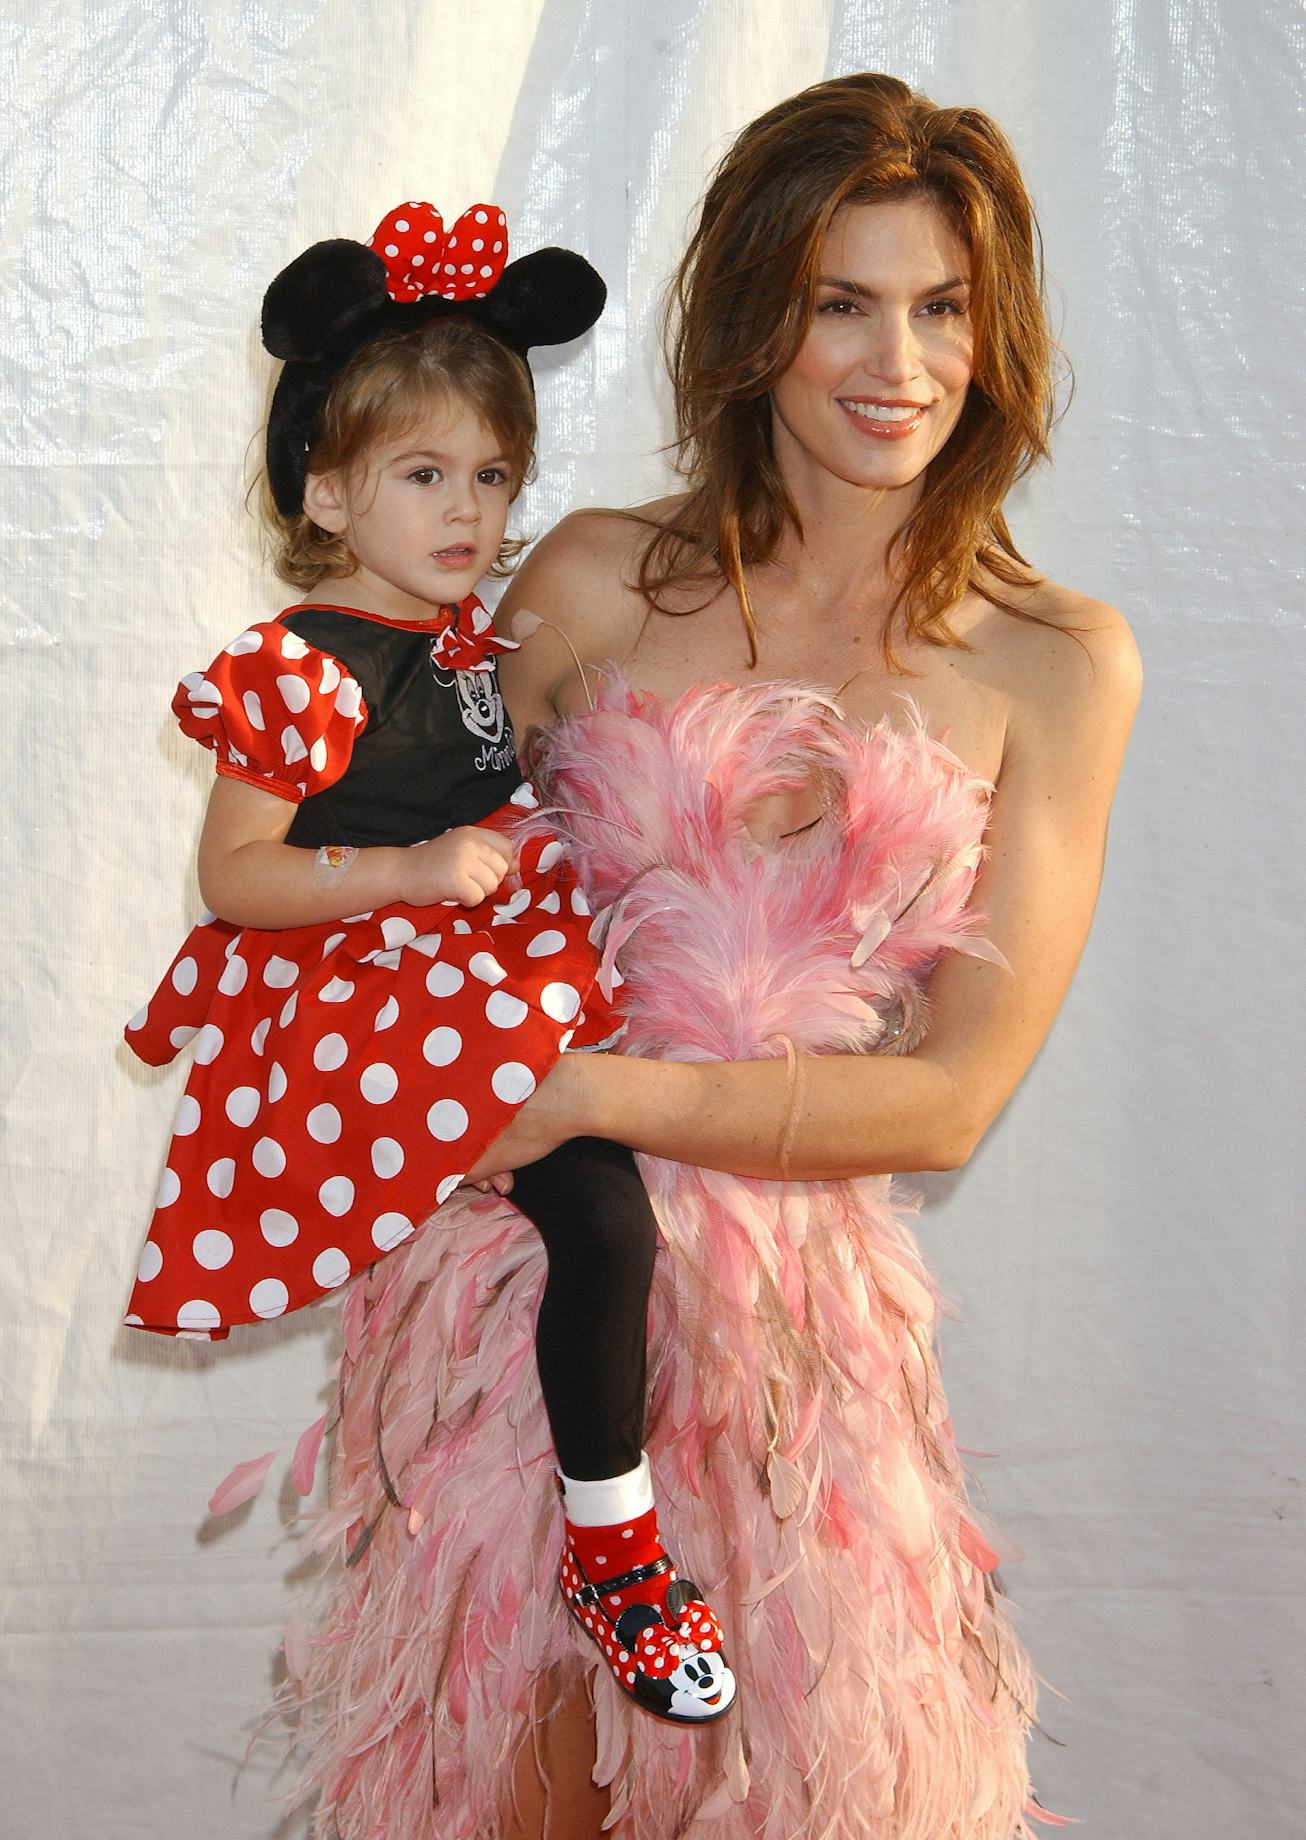 Kaia Gerber dressed as Minnie Mouse with Cindy Crawford in 2003.